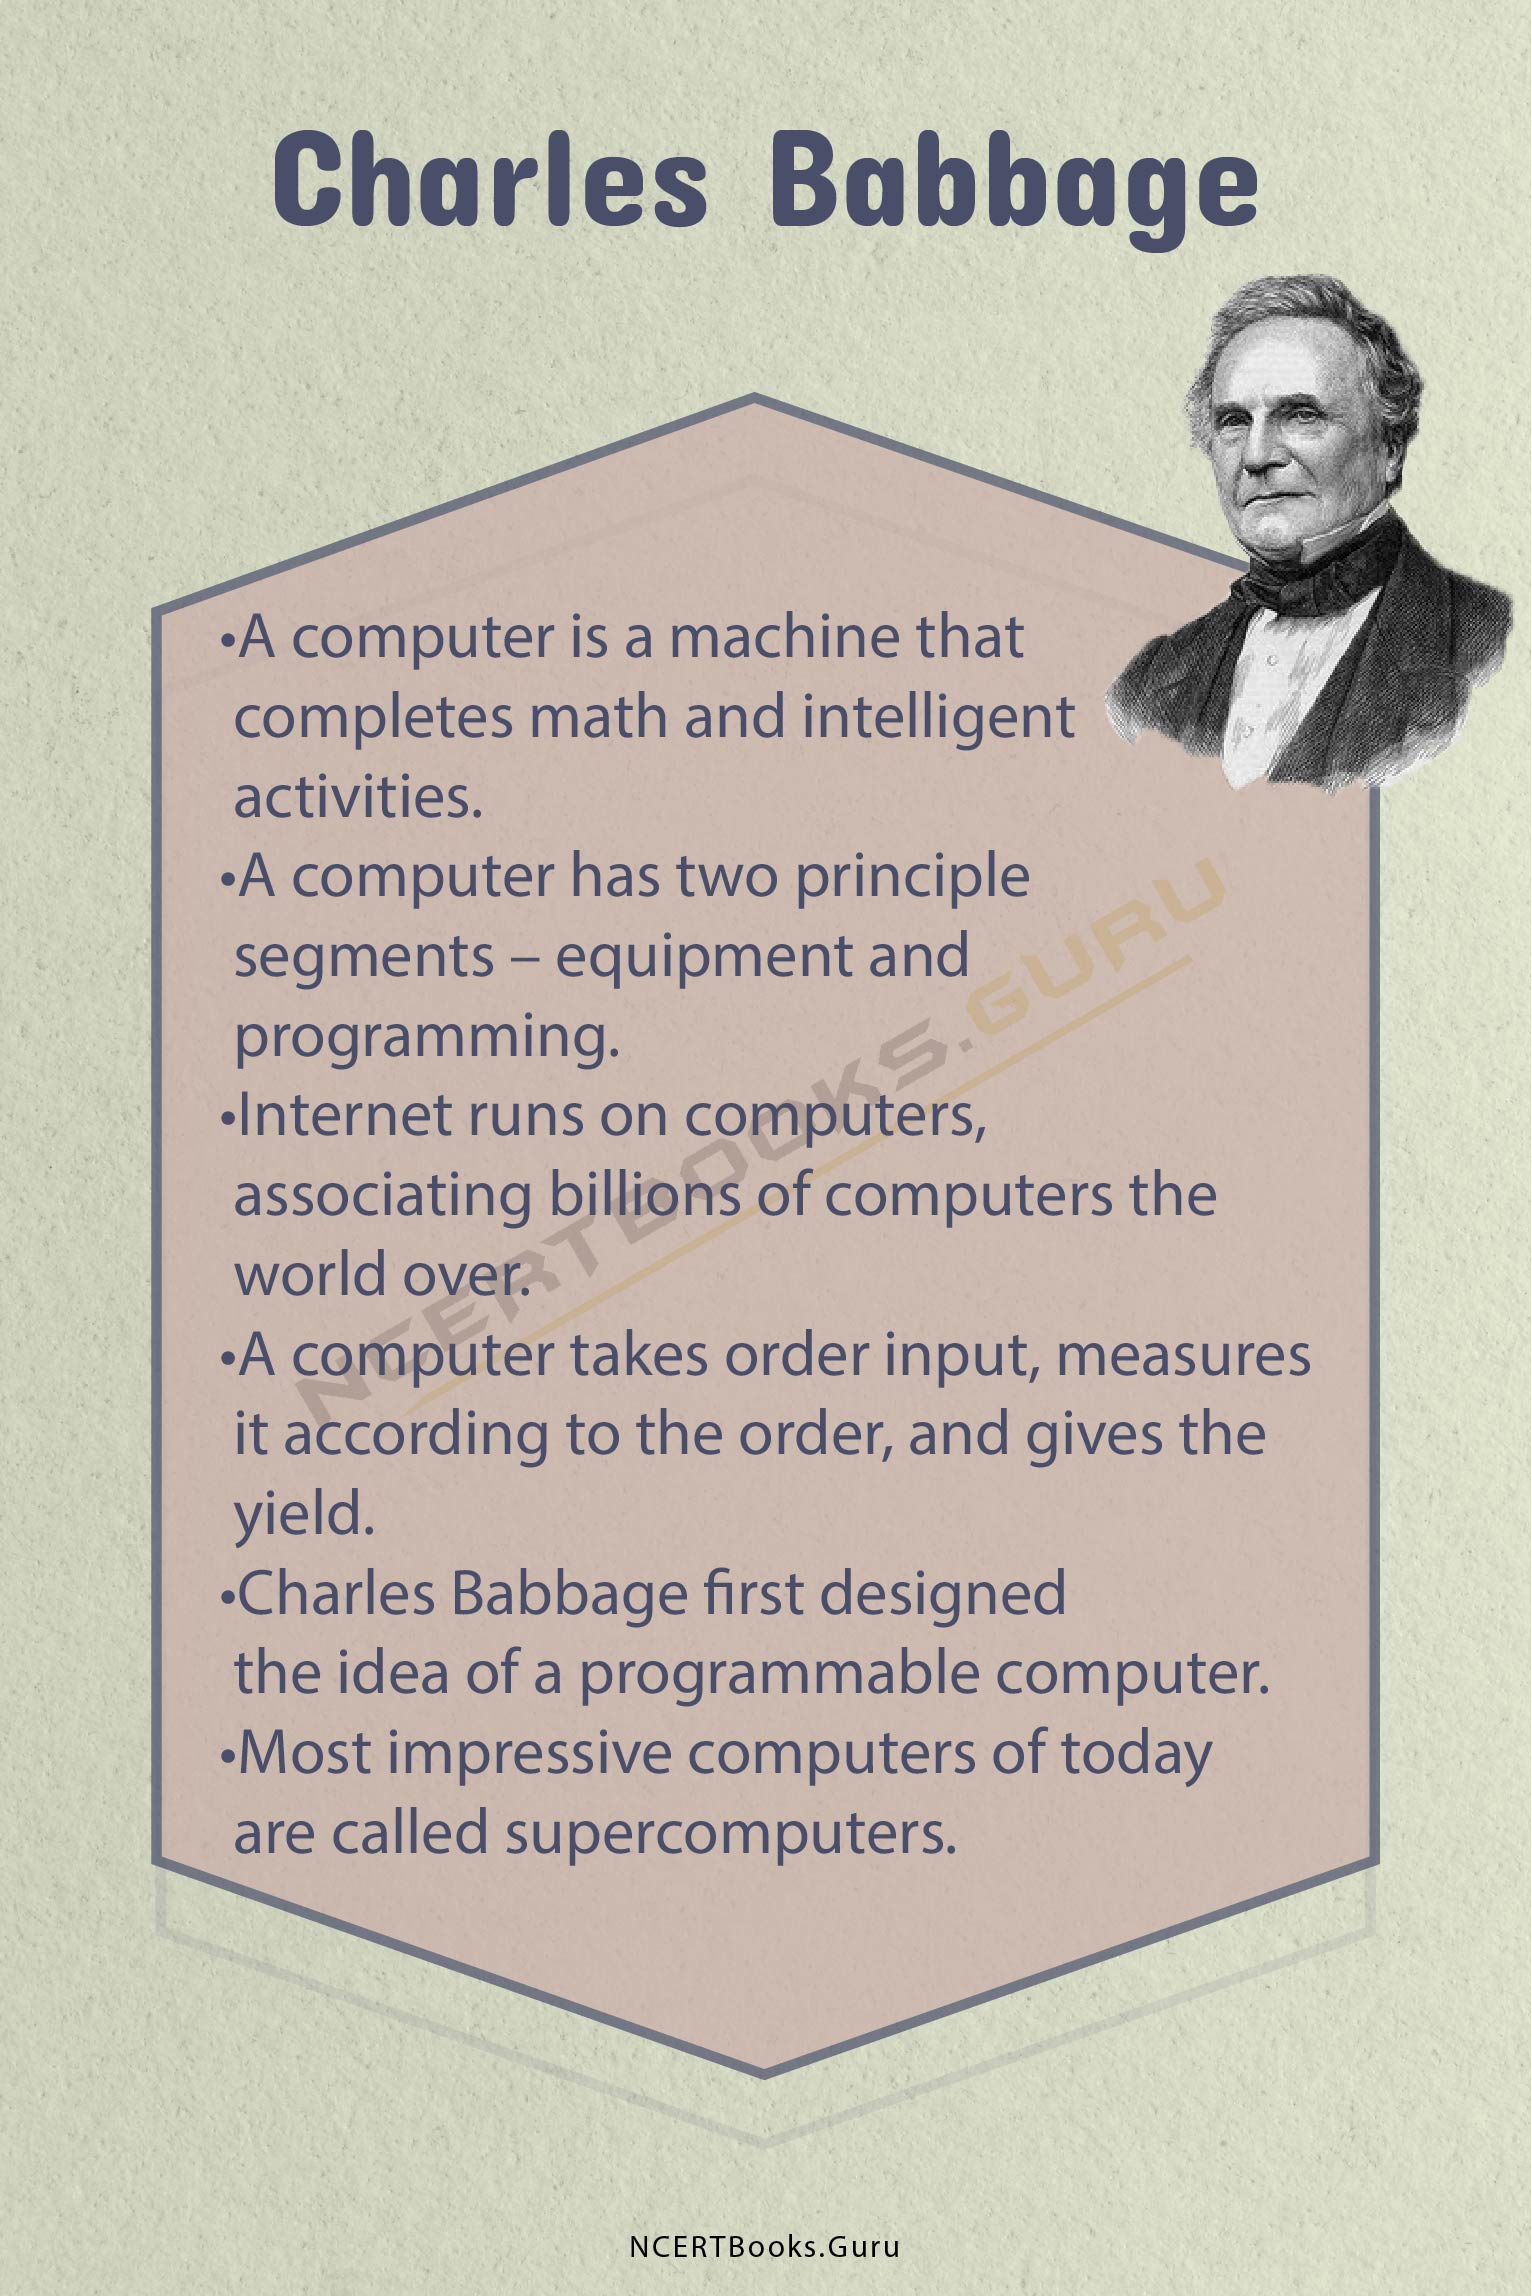 10 Lines on Charles Babbage 2